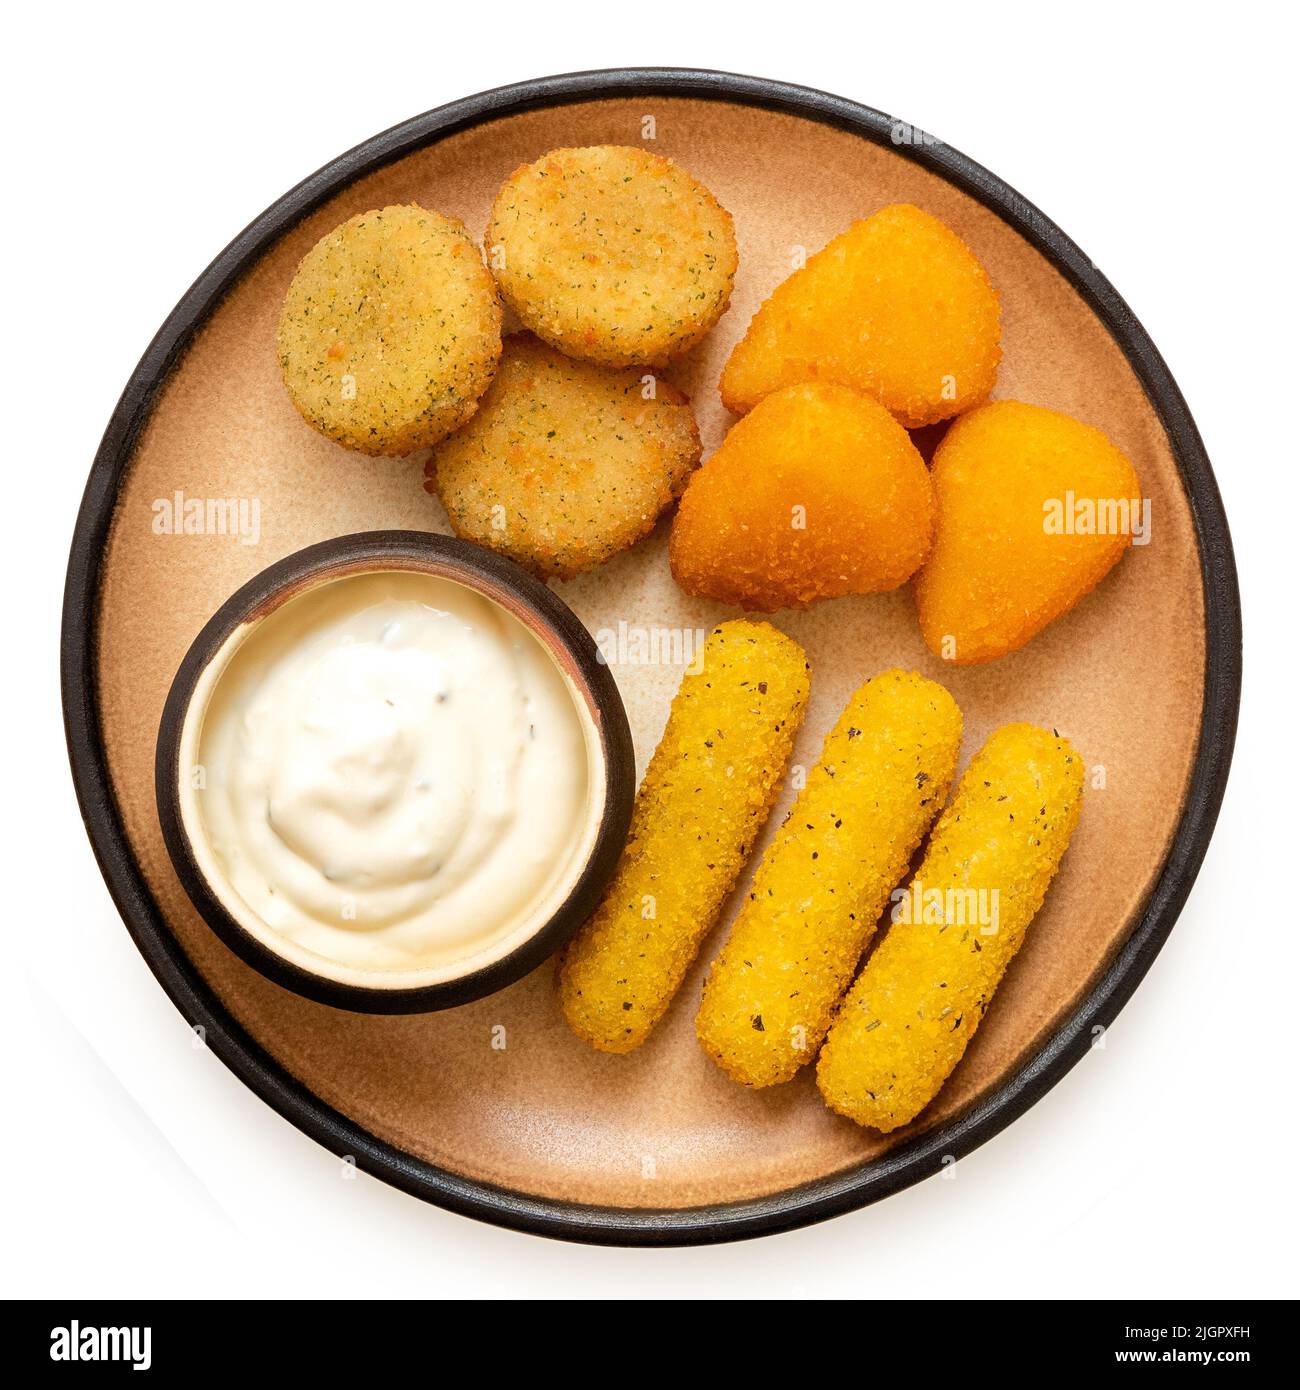 Fried breaded brie and camembert nuggets and mozzarella sticks on a rustic ceramic plate with white dip isolated on white. Top view. Stock Photo